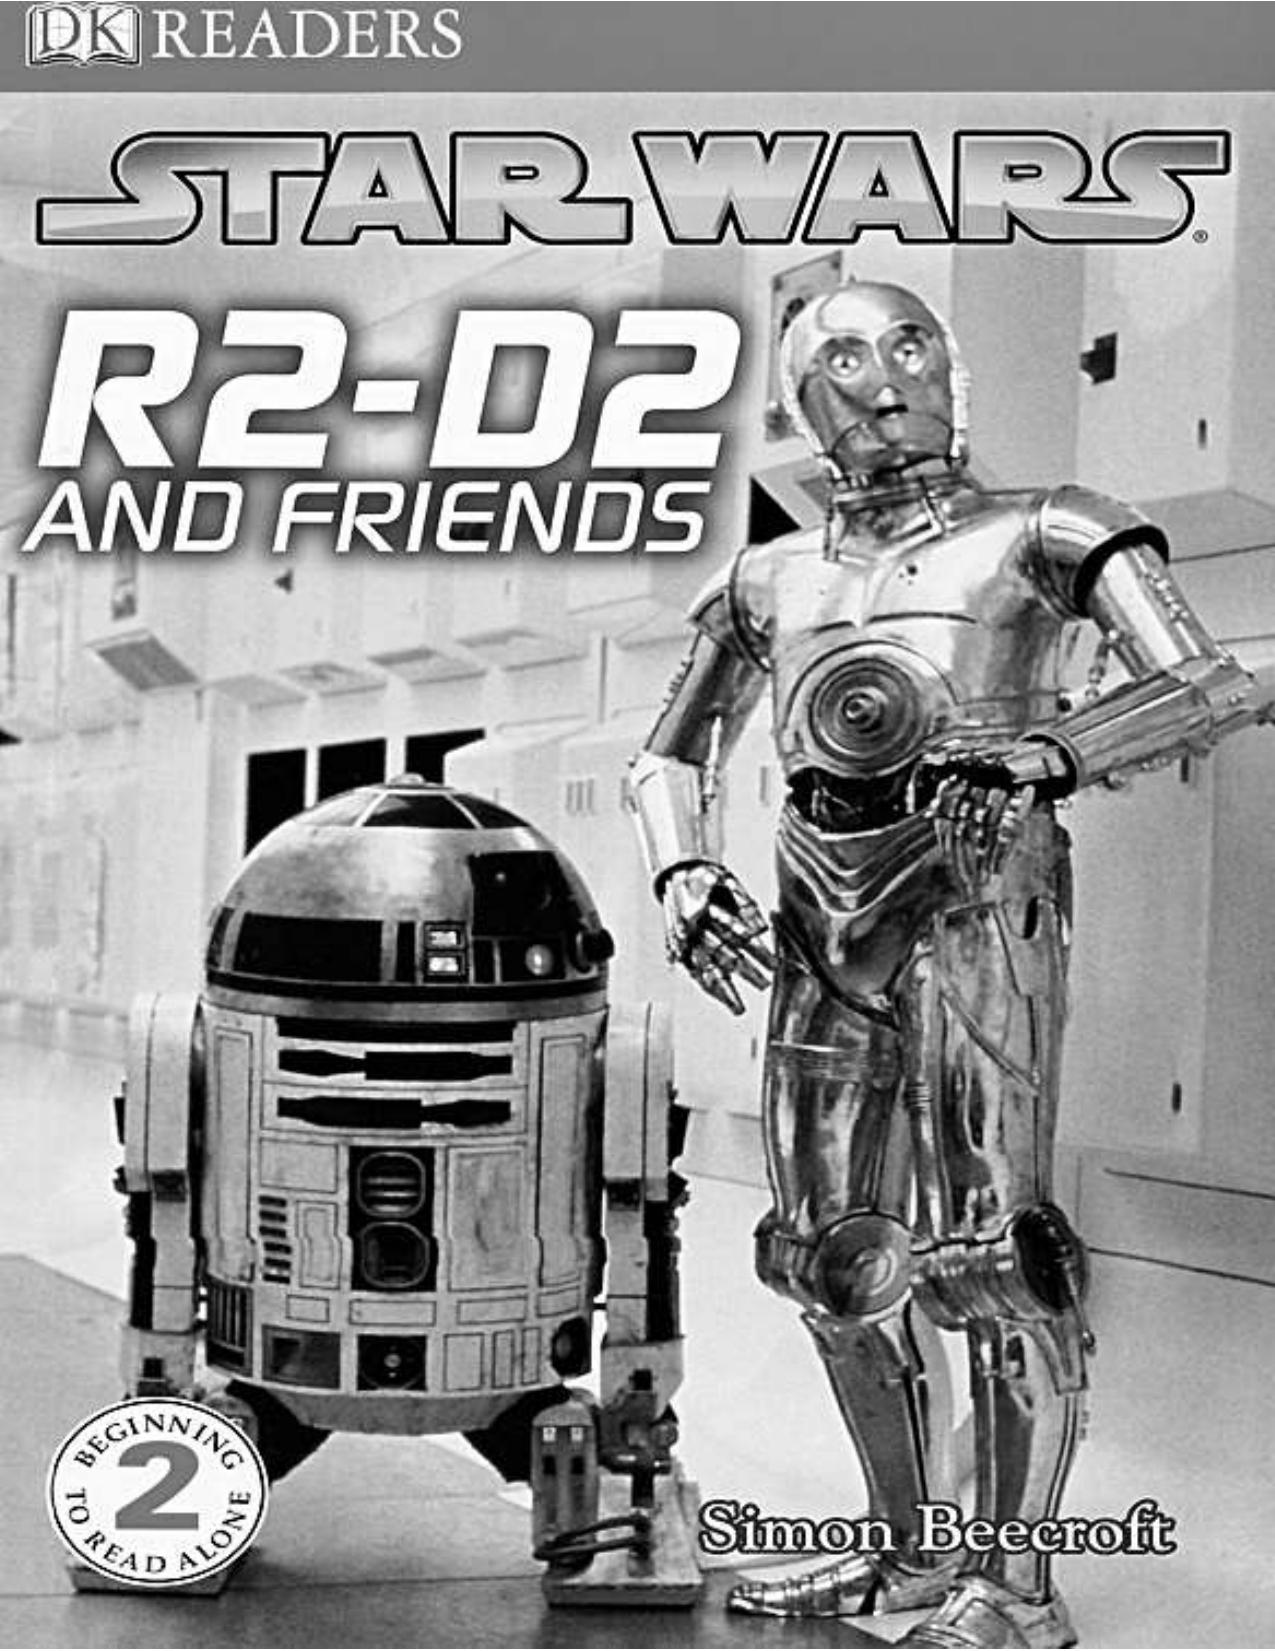 Star Wars: R2-D2 and Friends by Unknown